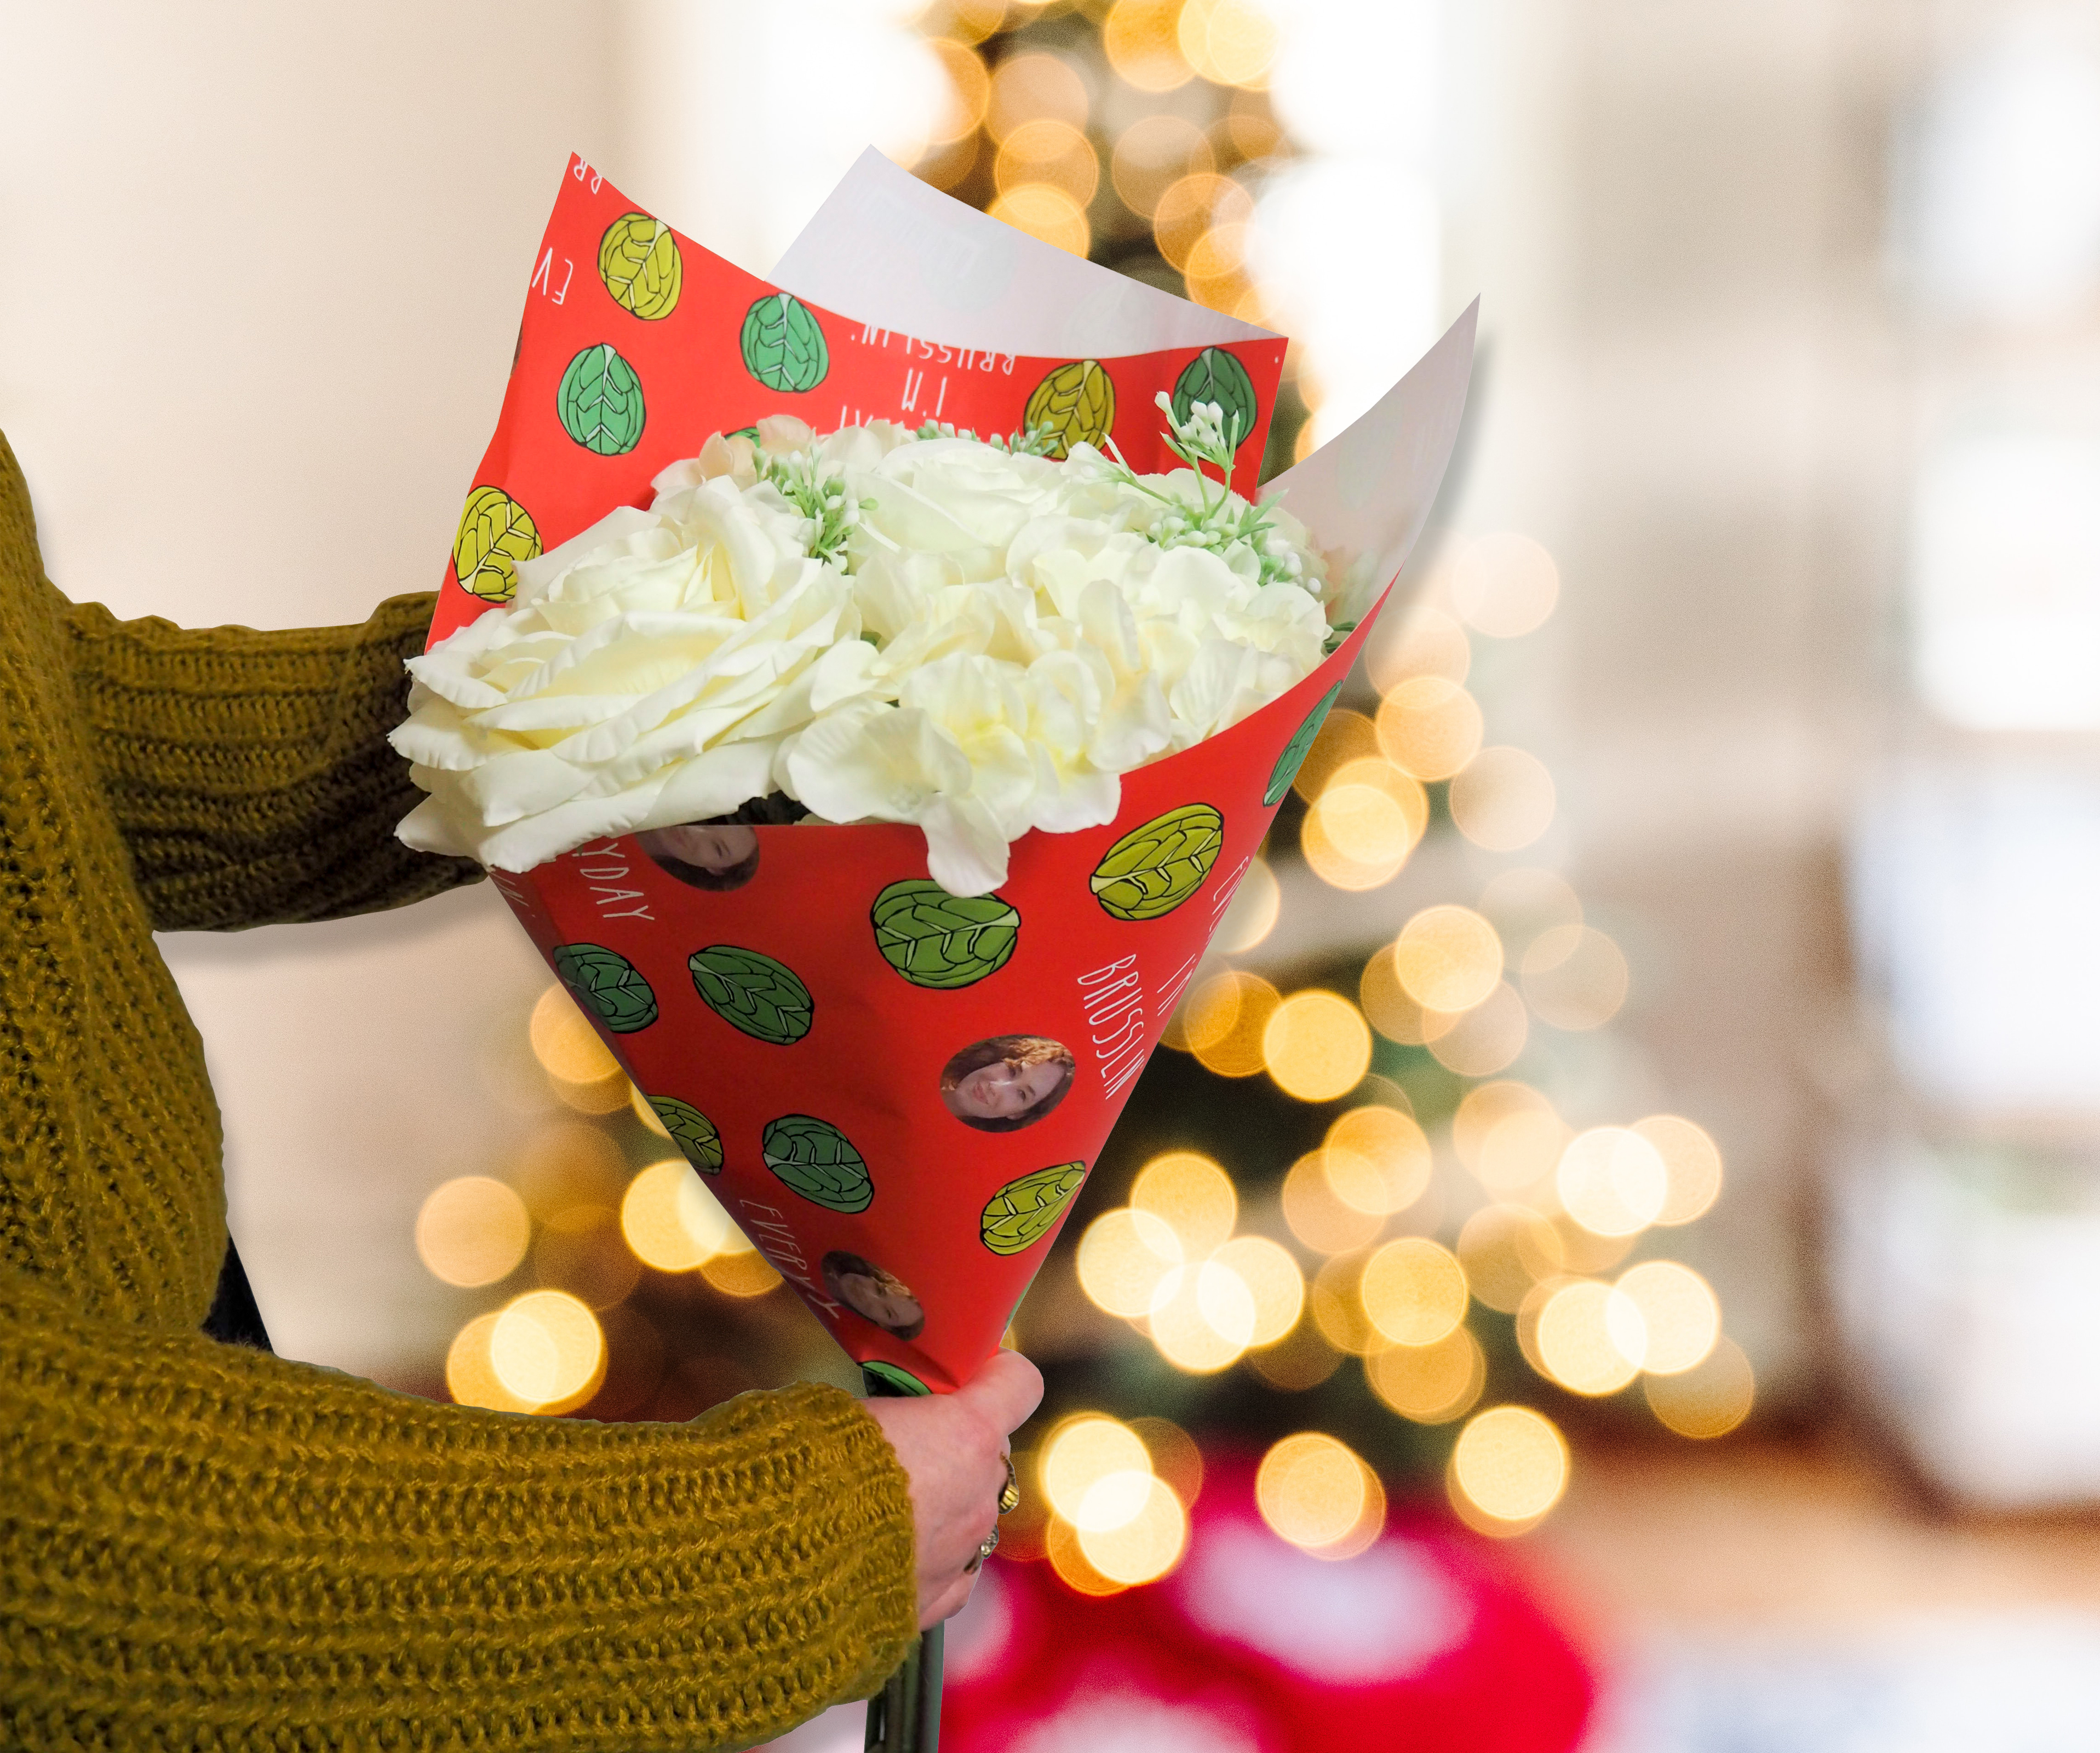 How to wrap flowers